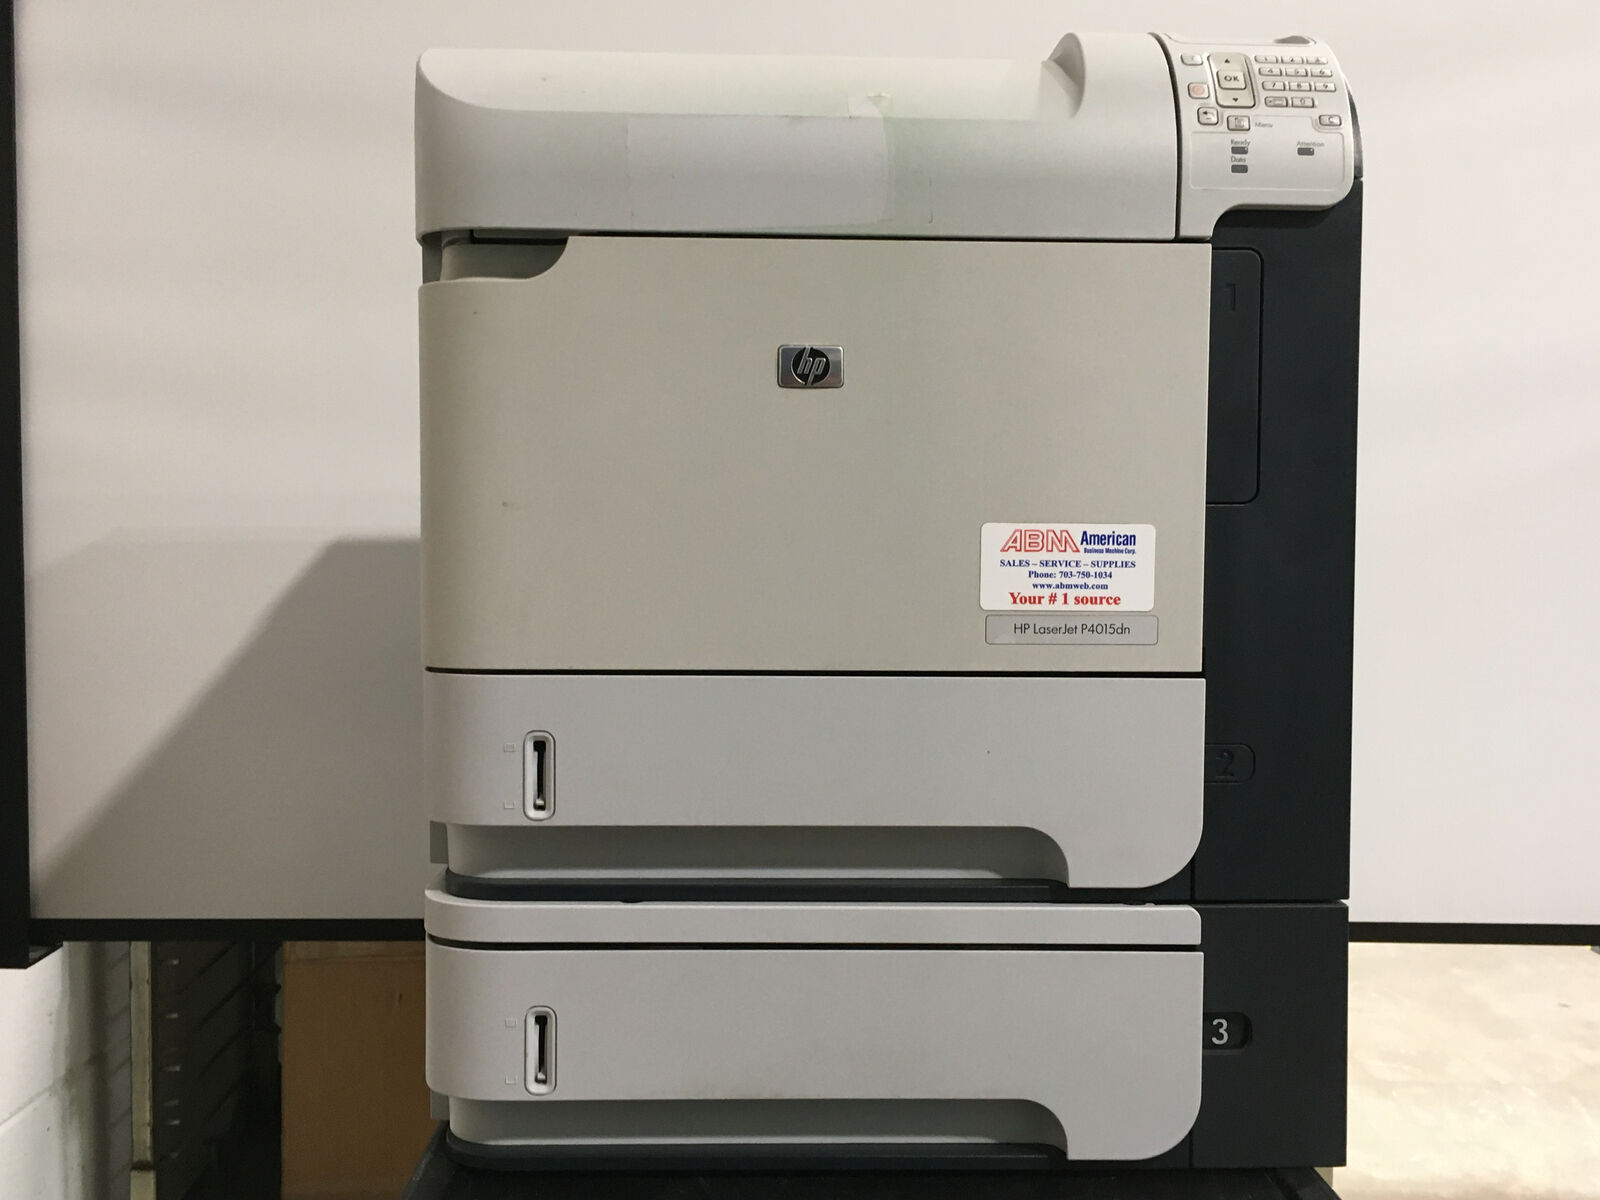 HP Laserjet P4015DN Workgroup Printer w/ 260k Pages and 83% Toner +Duplex +Tray